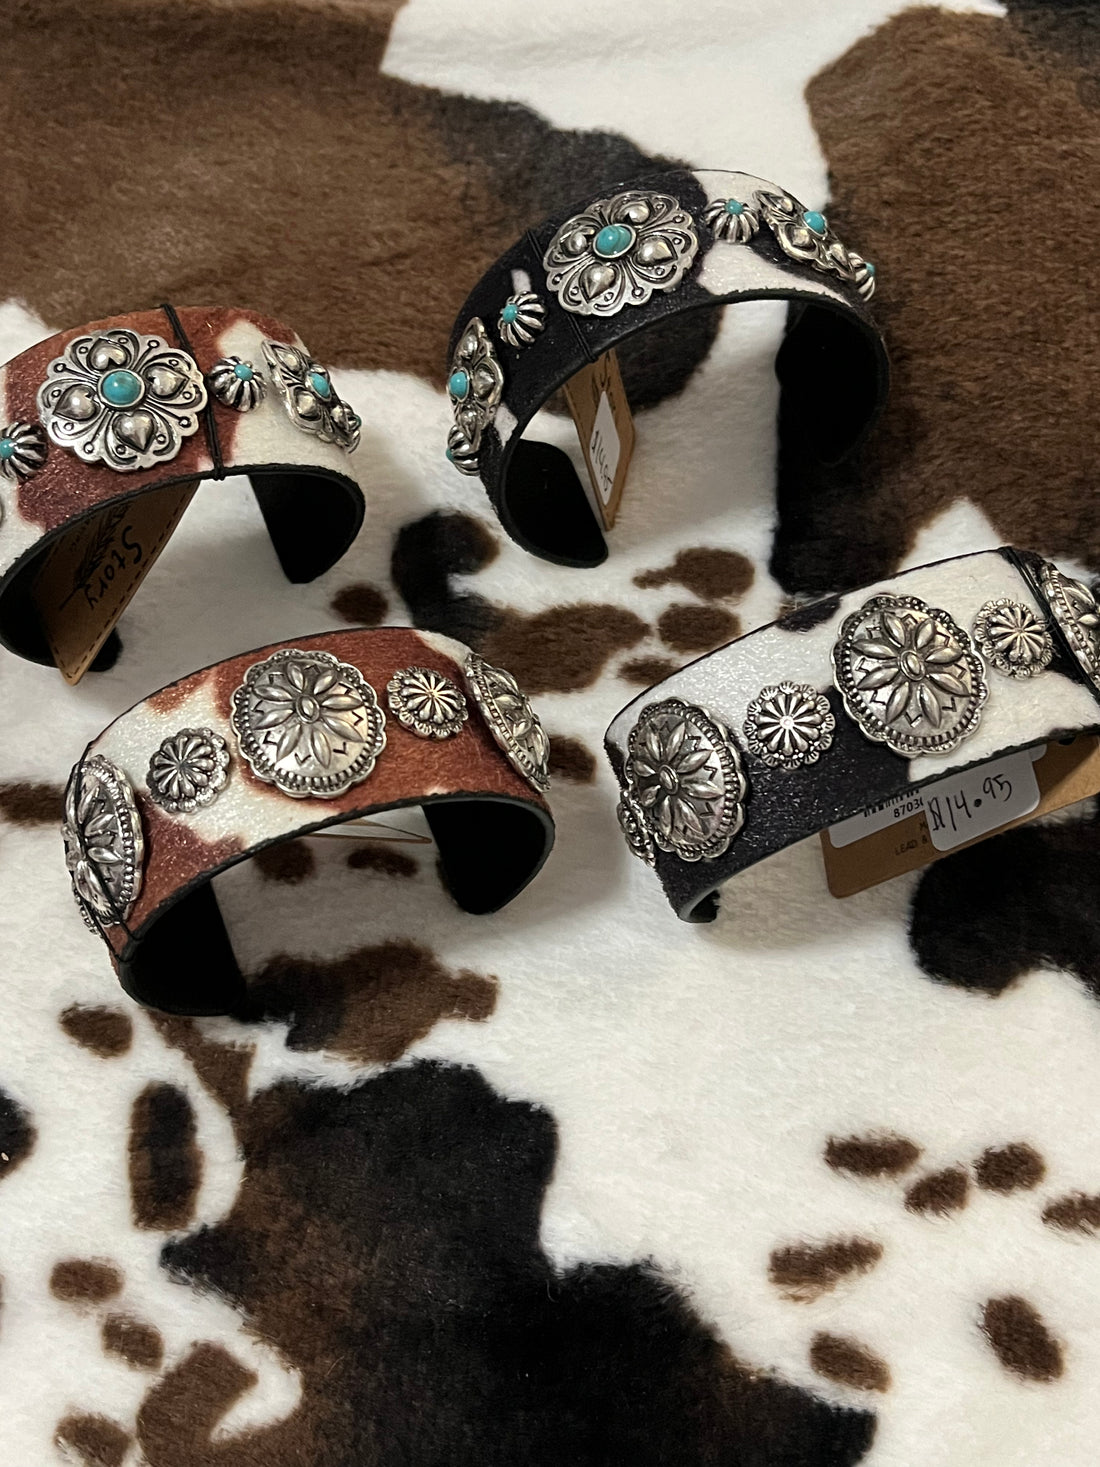 Collective View-Cow Print Cuff Bracelets with Concho Accents